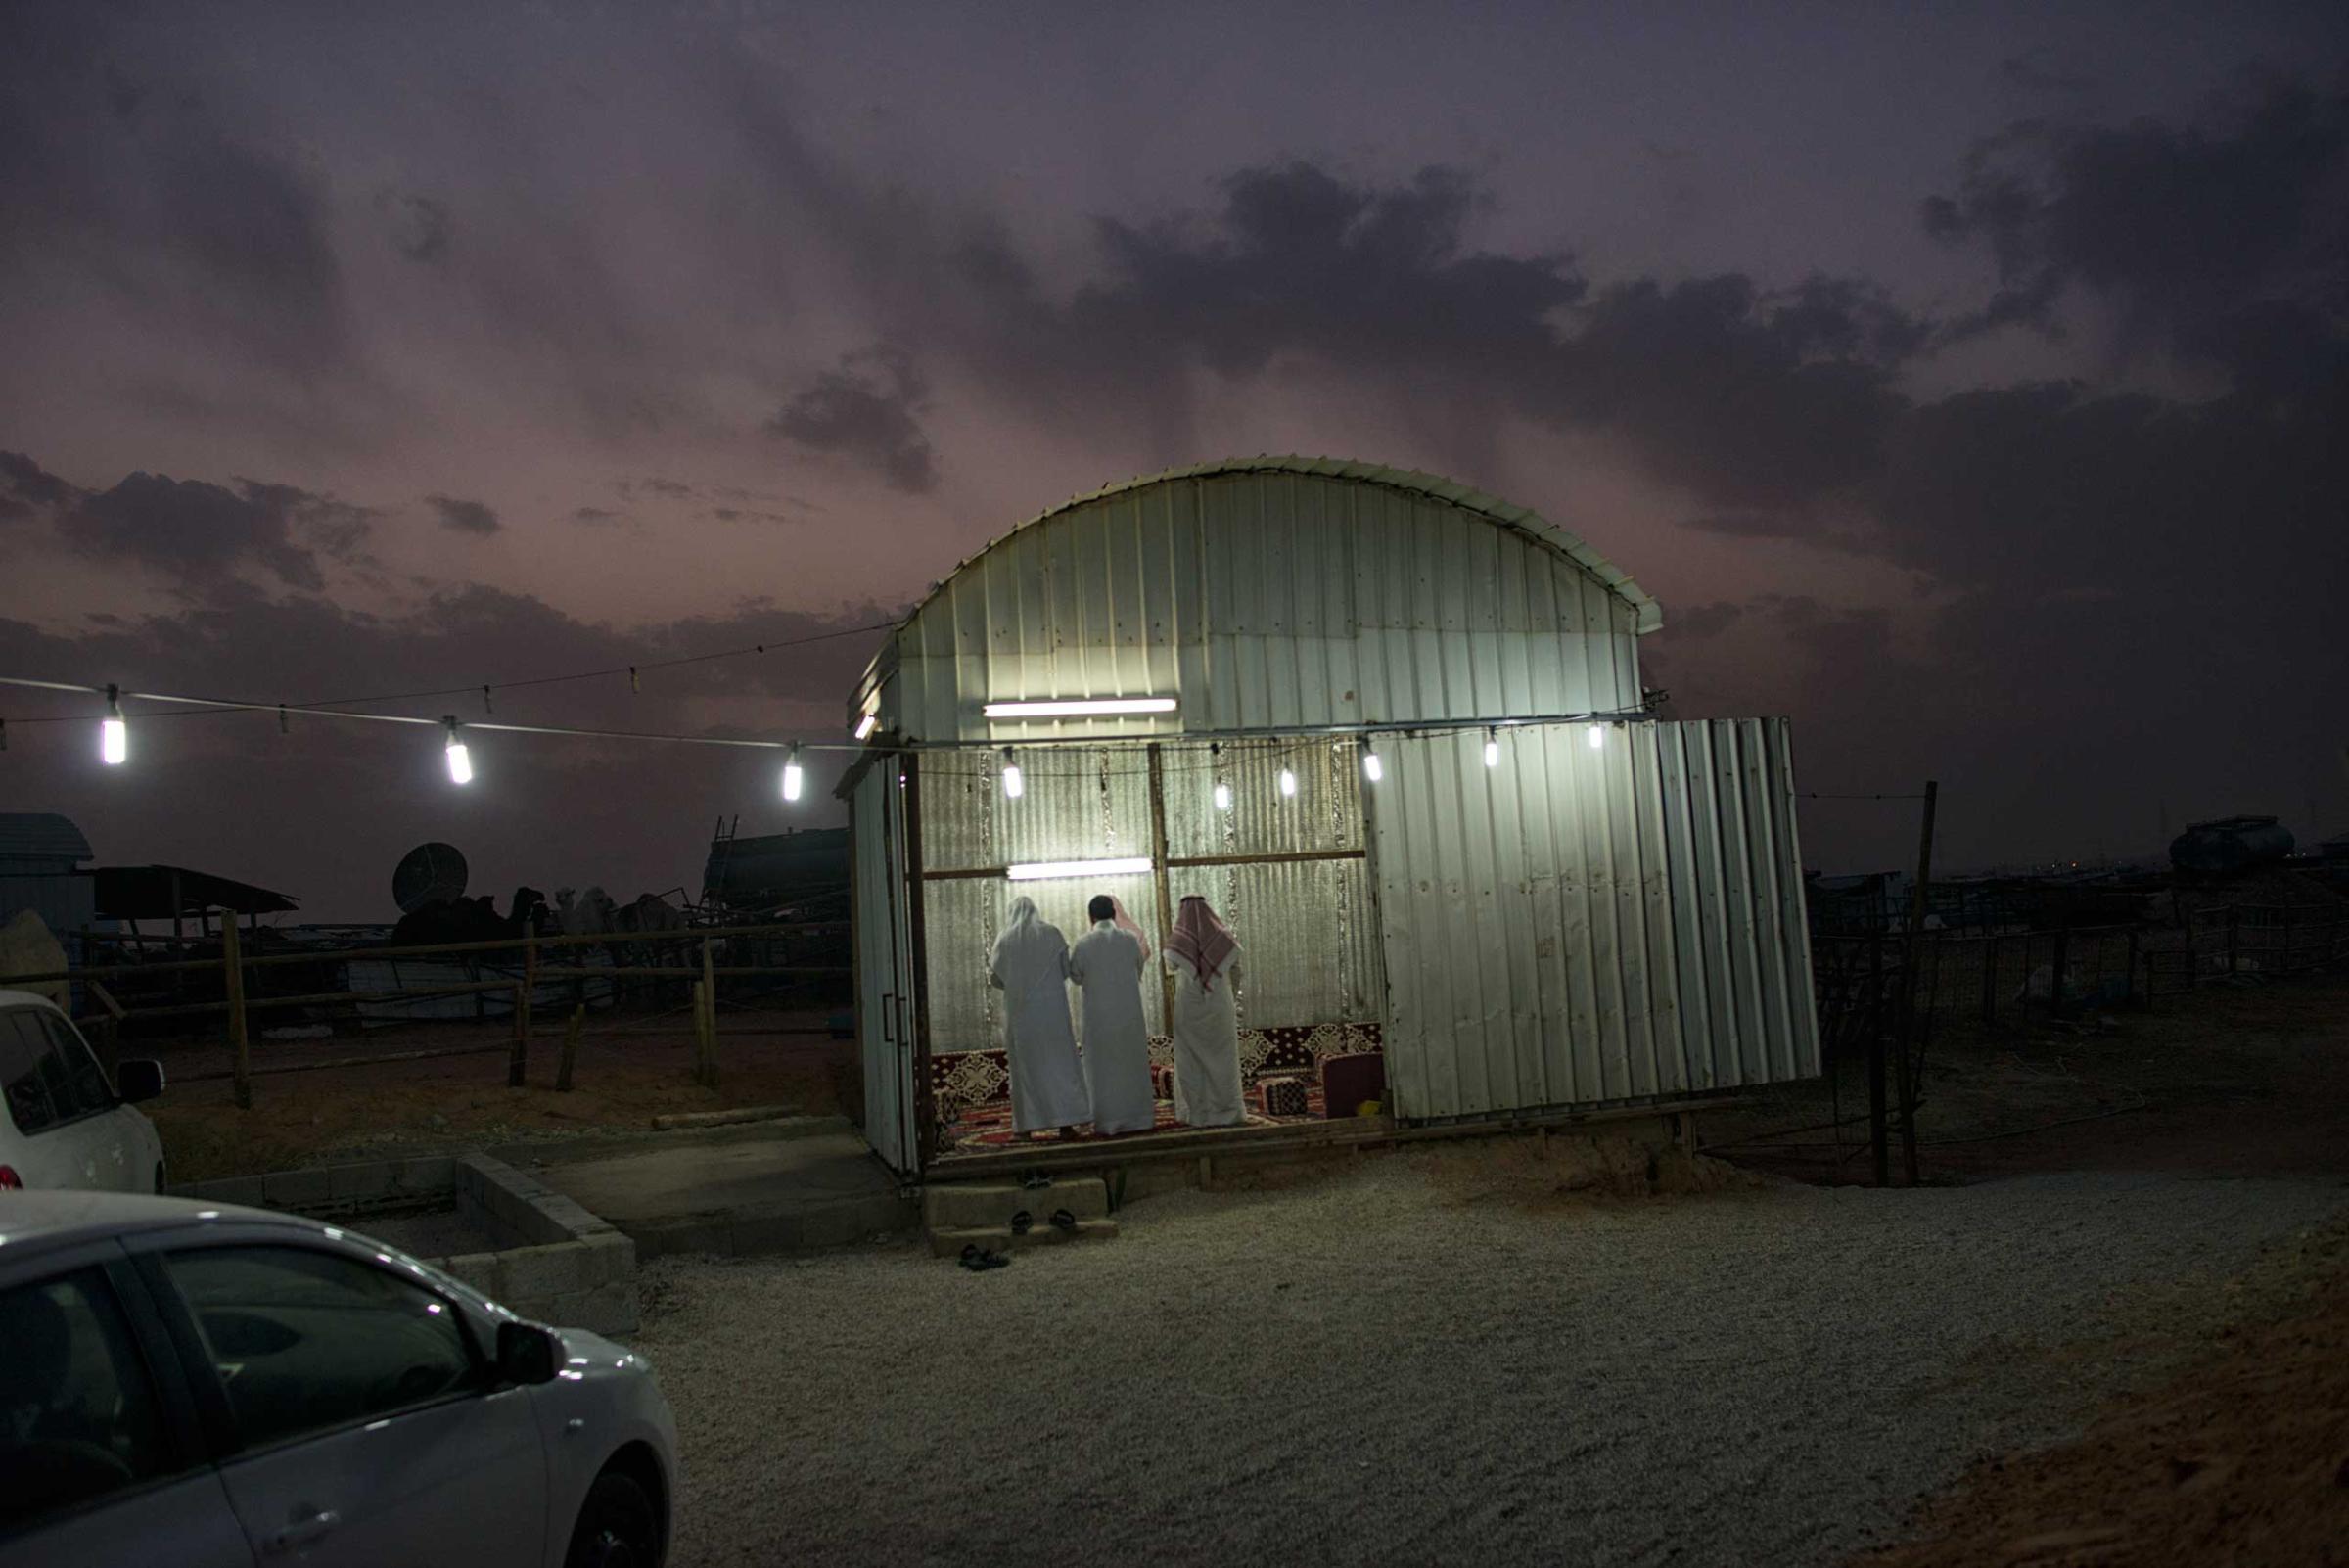 Saudi men pray at dusk at a camel market outside of Riyadh, Saudi Arabia, March 3, 2013.   Despite an extremely wealthy sector of society in Saudi Arabia, and the the veneer of widespread affluence projected outside the Kingdom, severe poverty is as much an aspect of life in Riyadh as wealth. (Credit: Lynsey Addario/ VII)